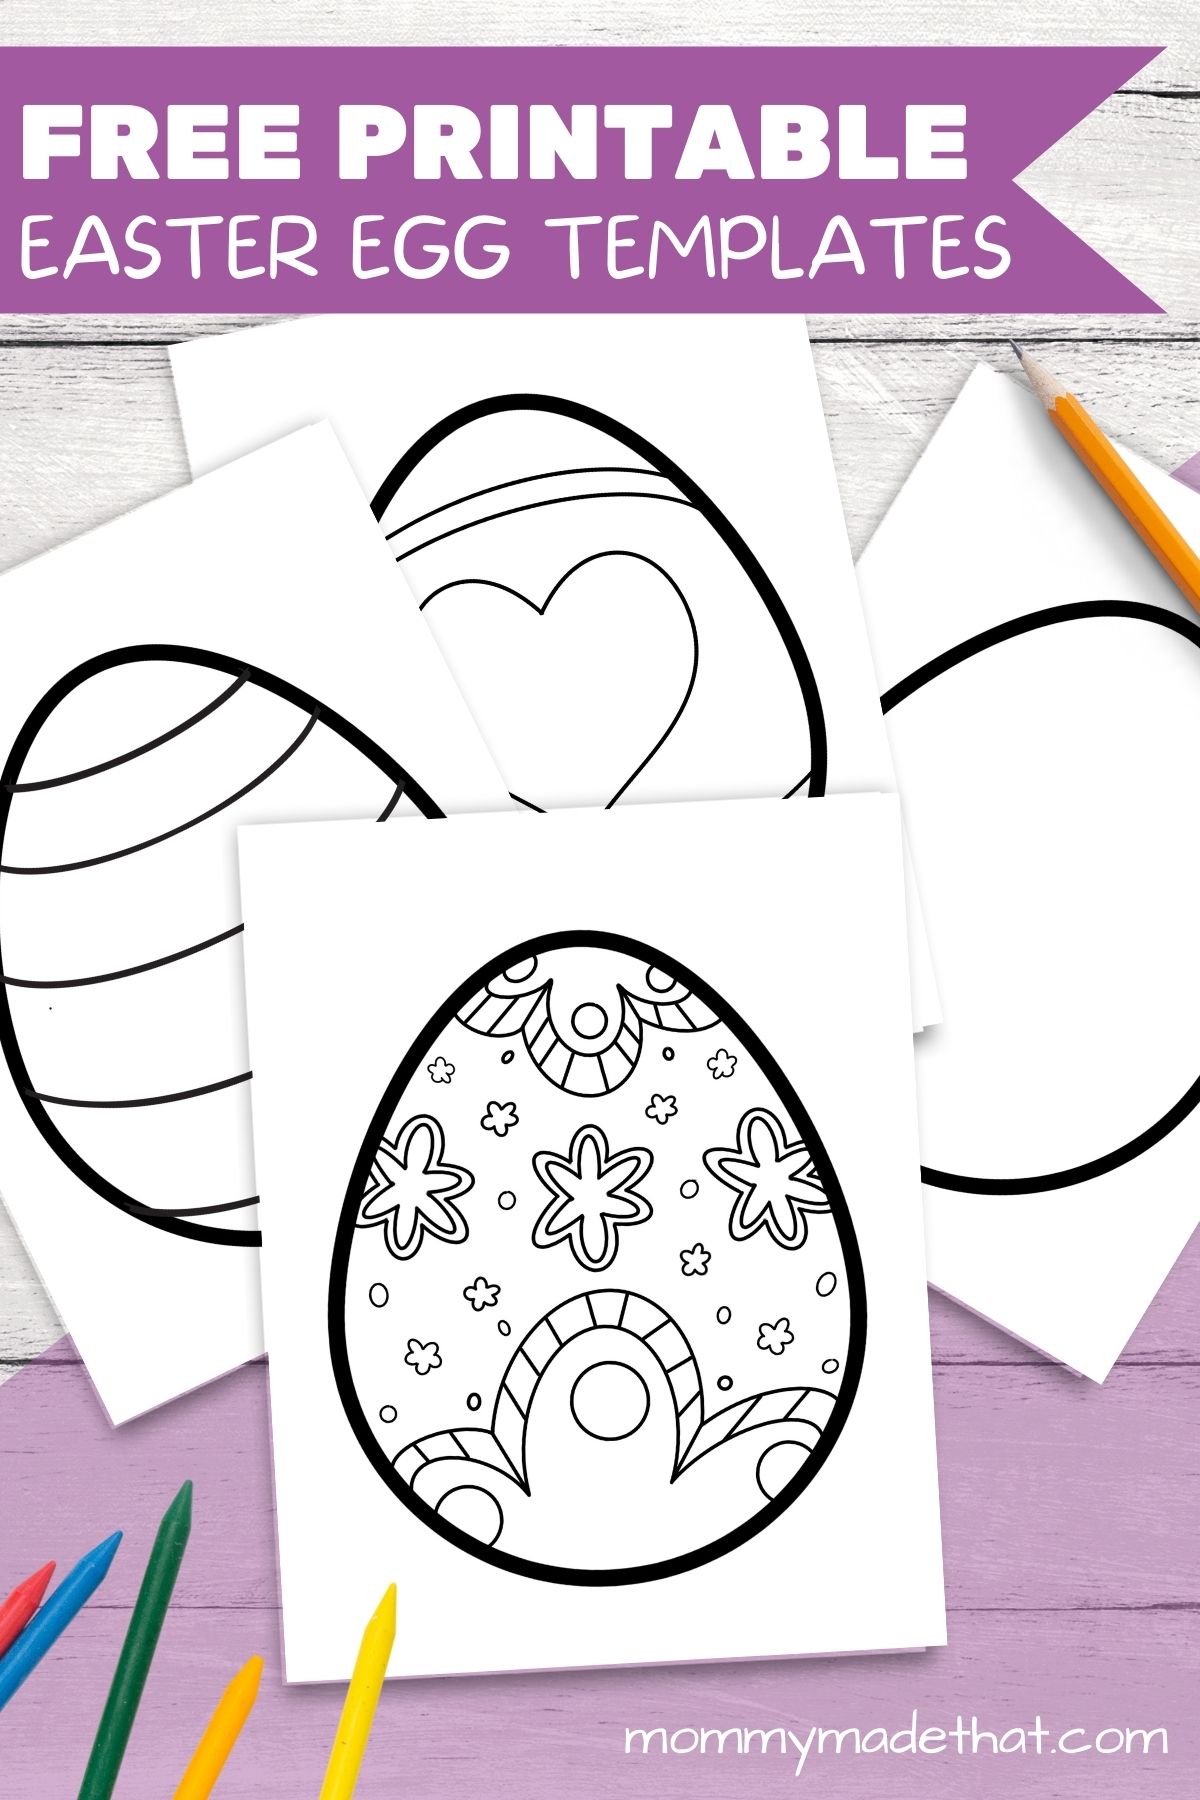 Free Printable Easter Egg Templates (Tons of Patterns!)